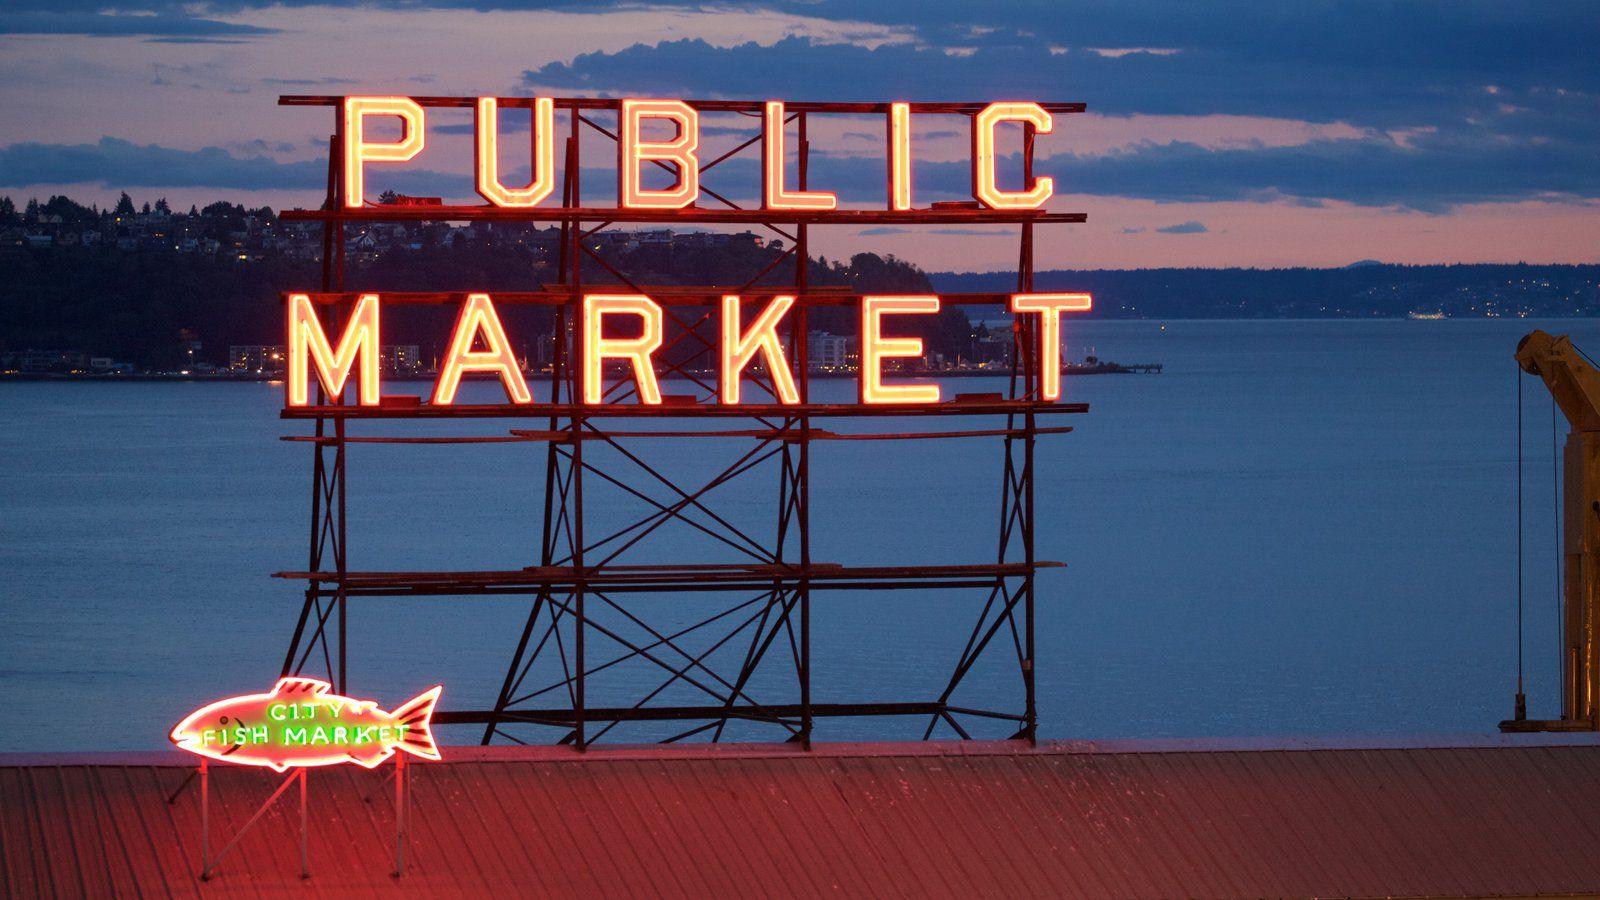 Pike Place Market Logo - Pike Place Market Picture: View Photo & Image of Pike Place Market